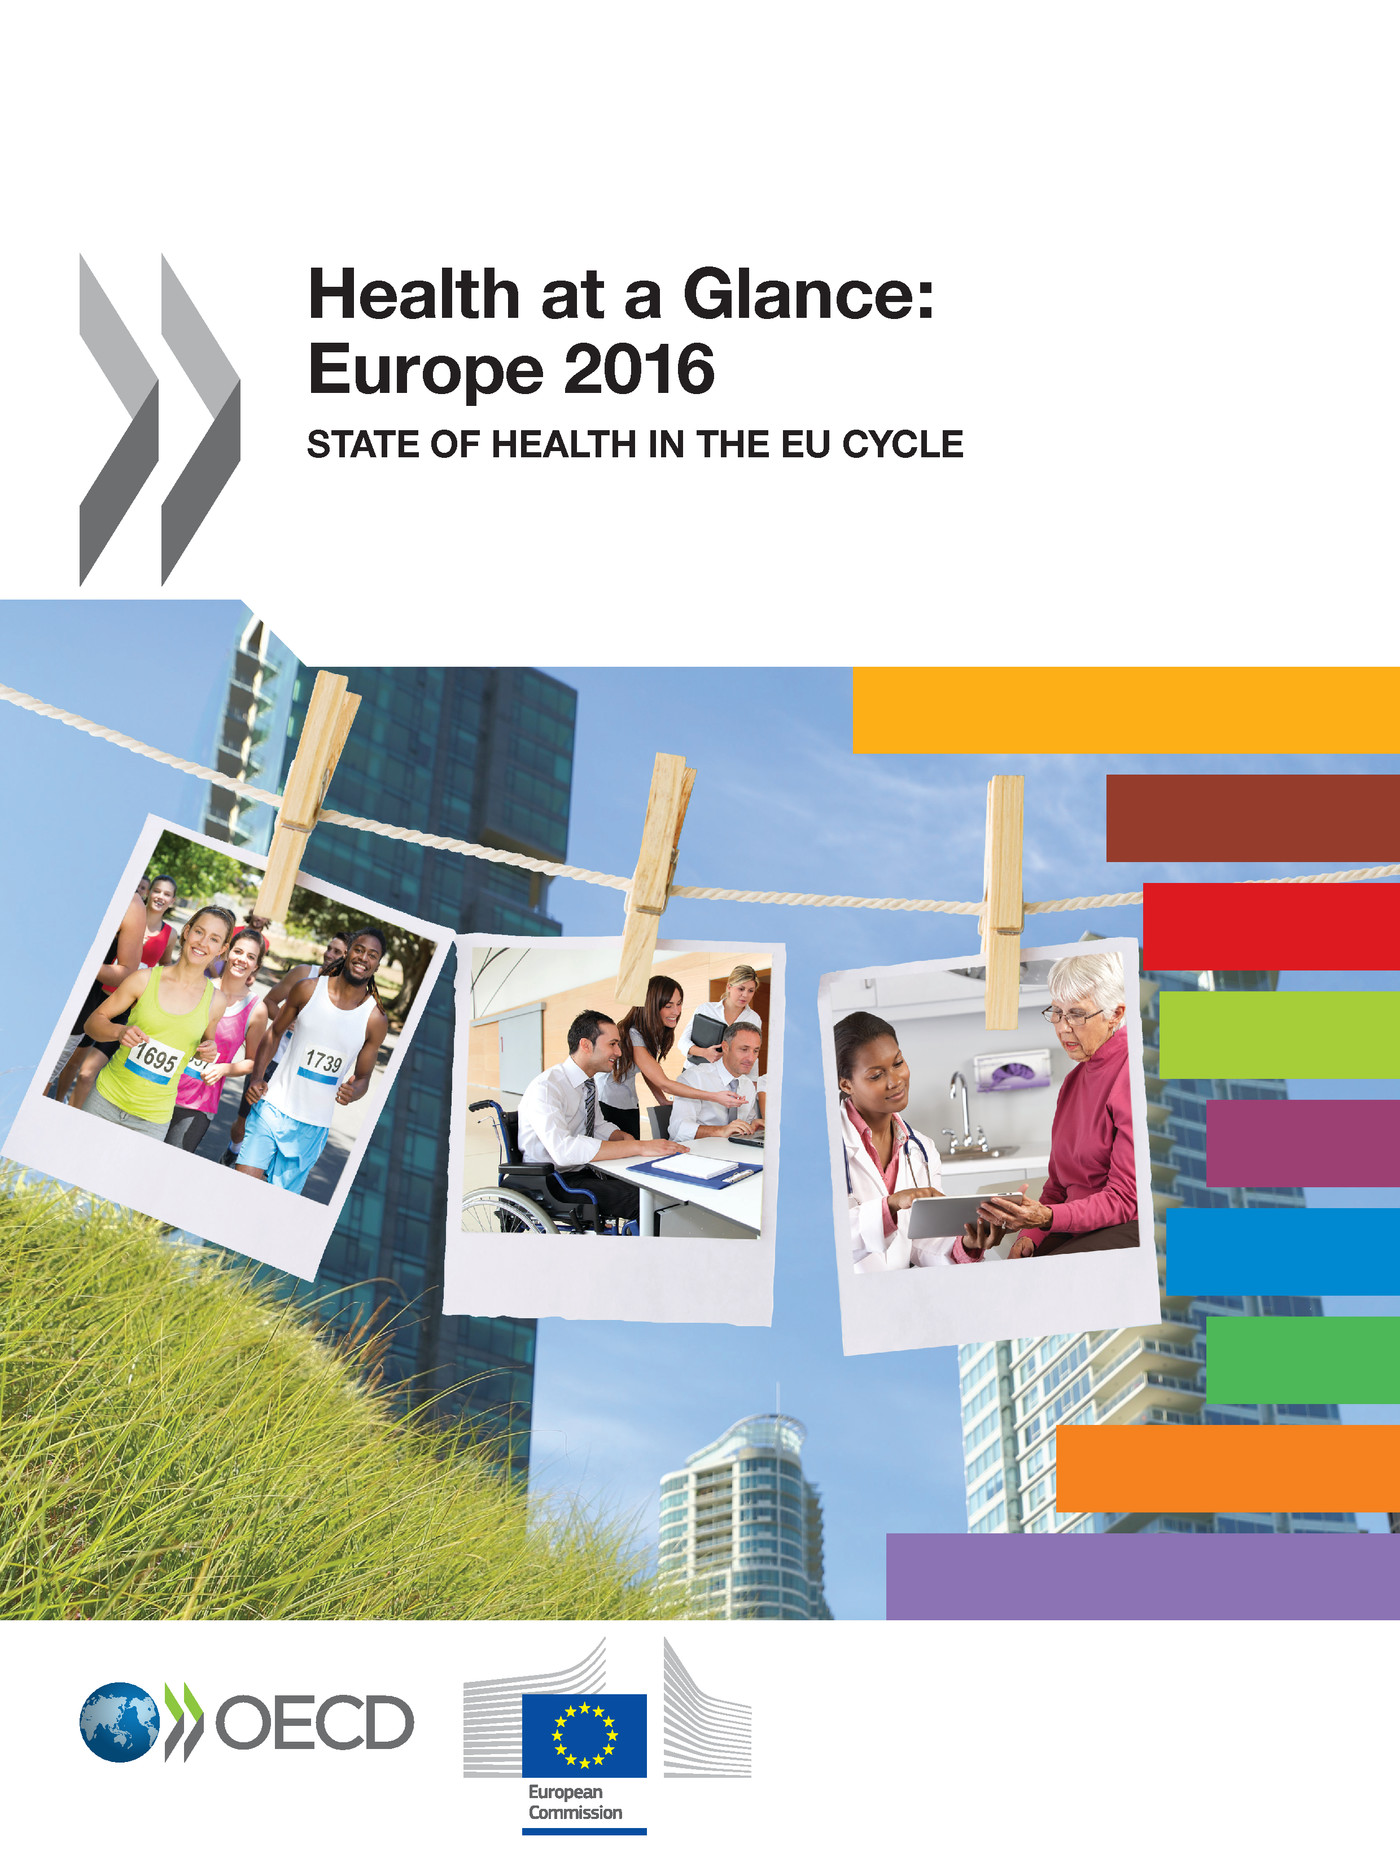 Health at a Glance: Europe 2016 -  Collectif - OCDE / OECD